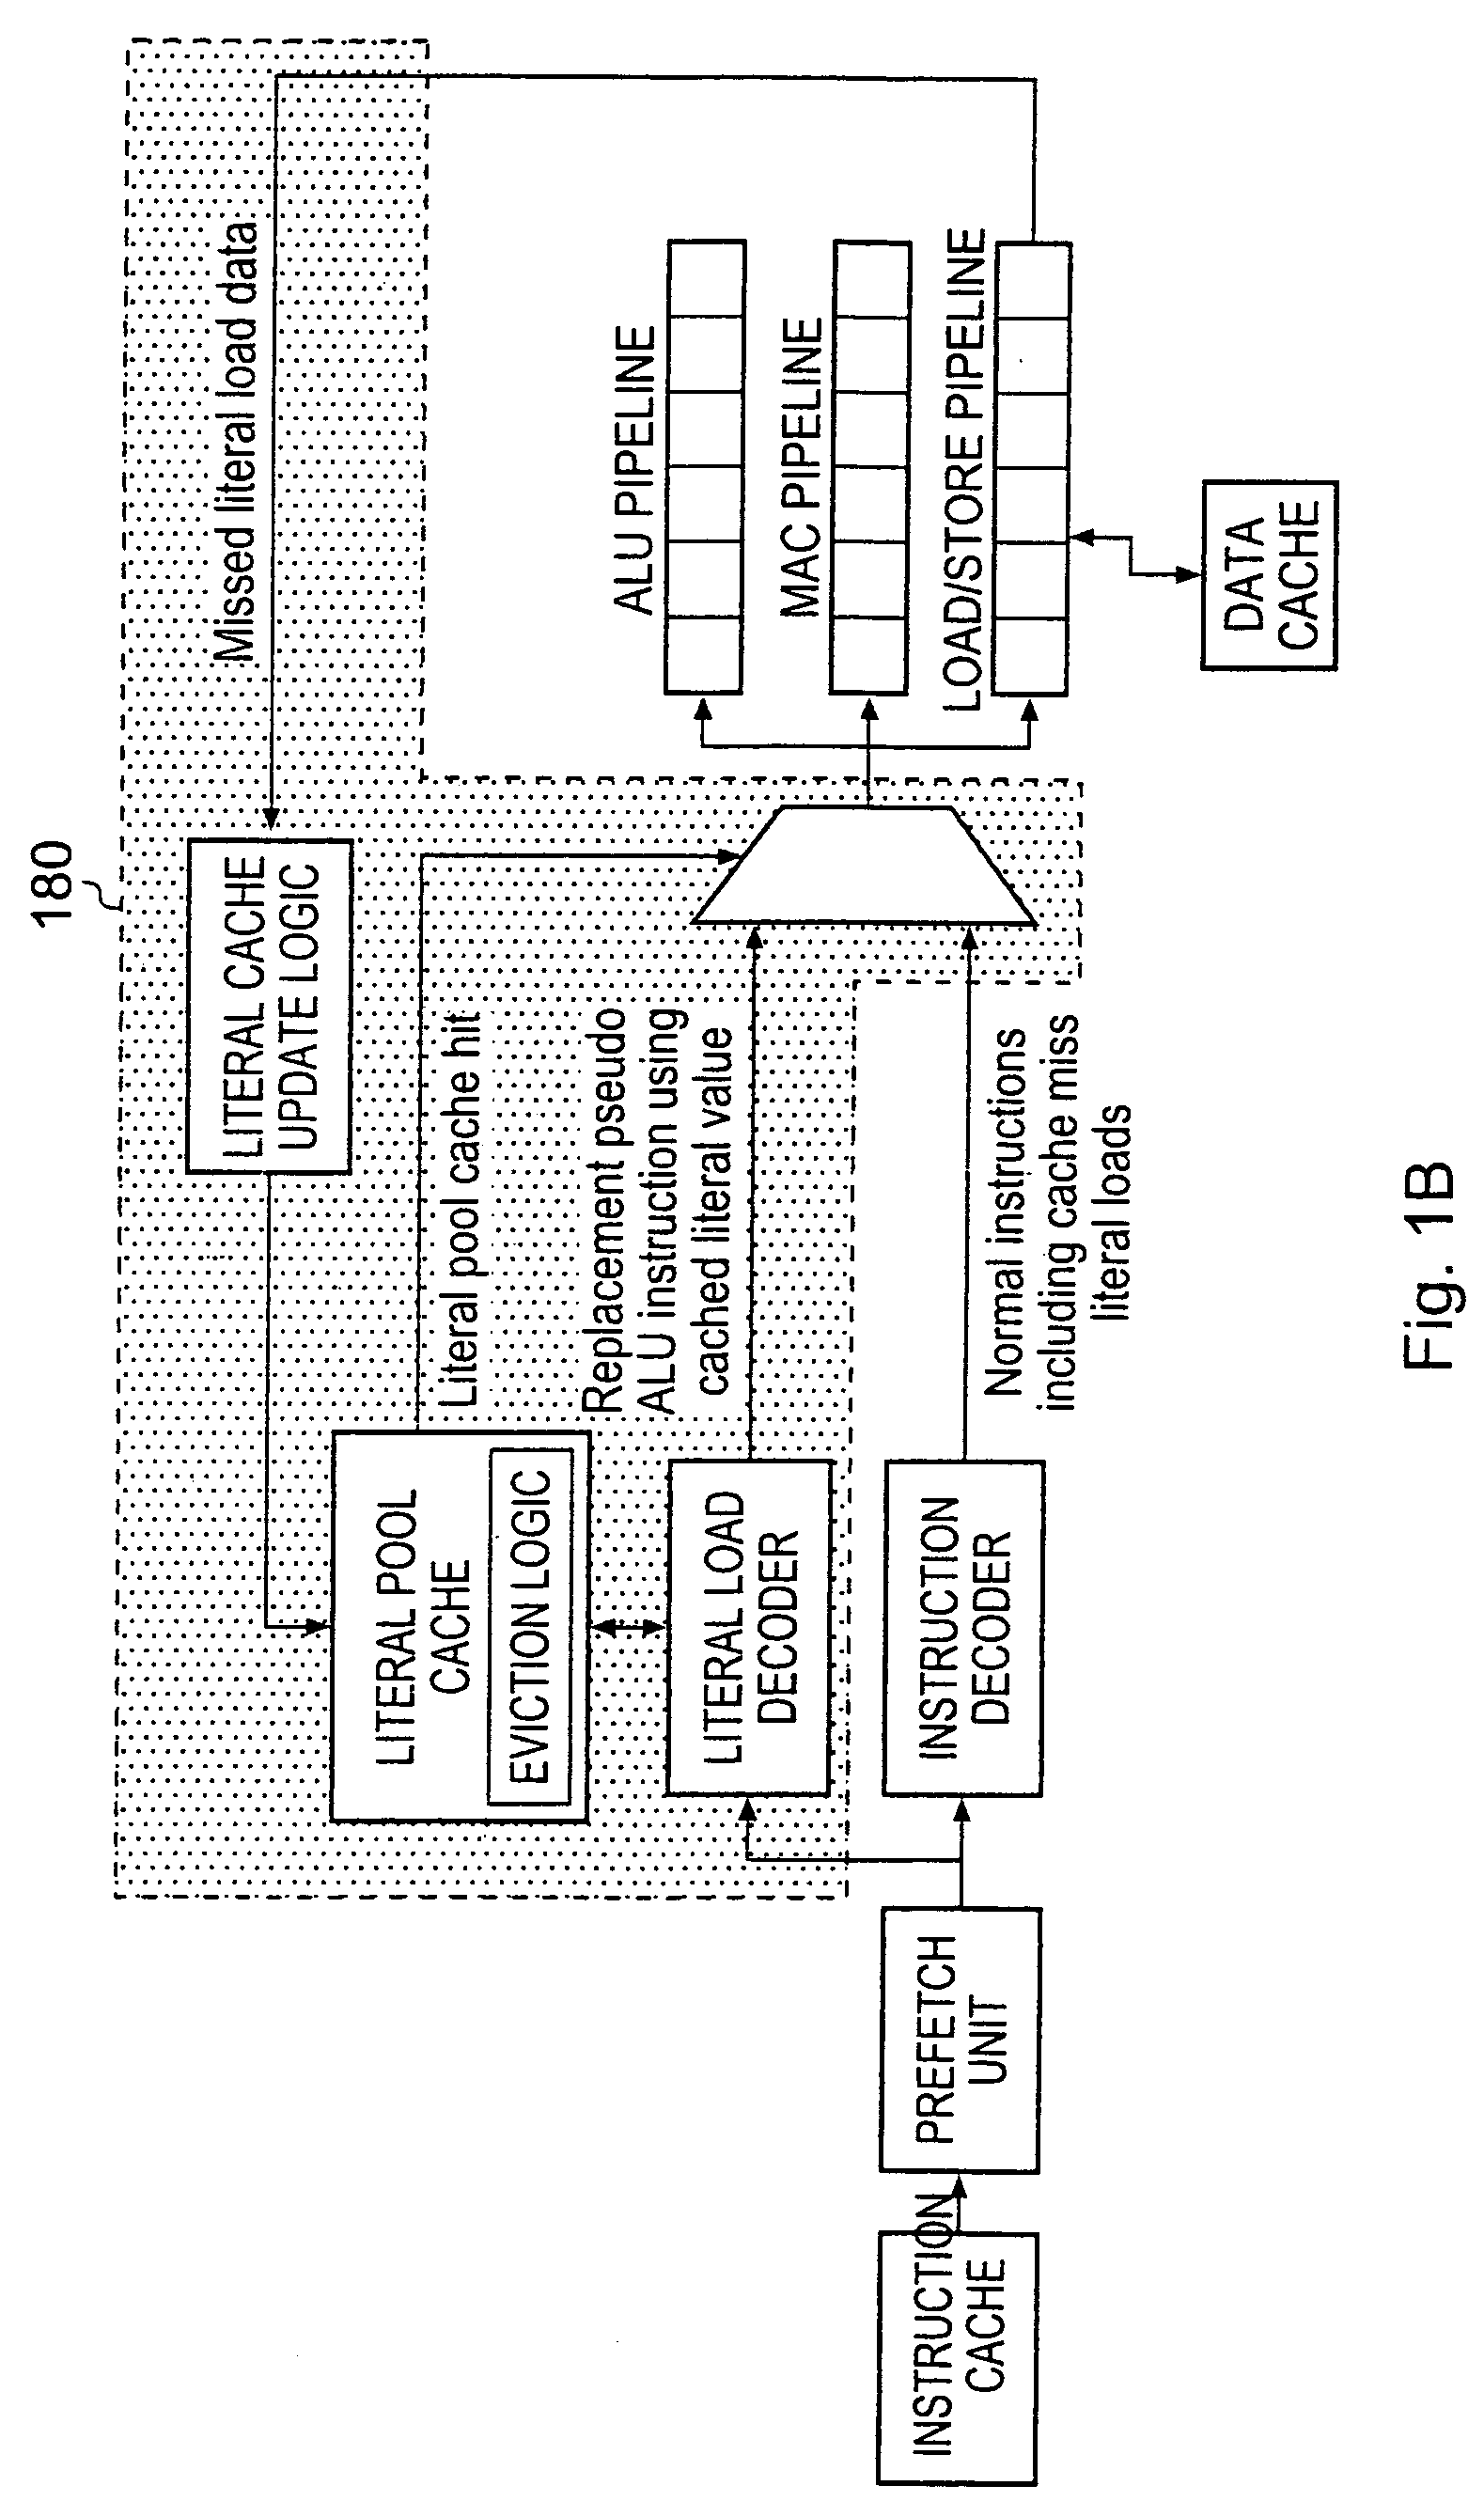 Data access handling in a data processing system